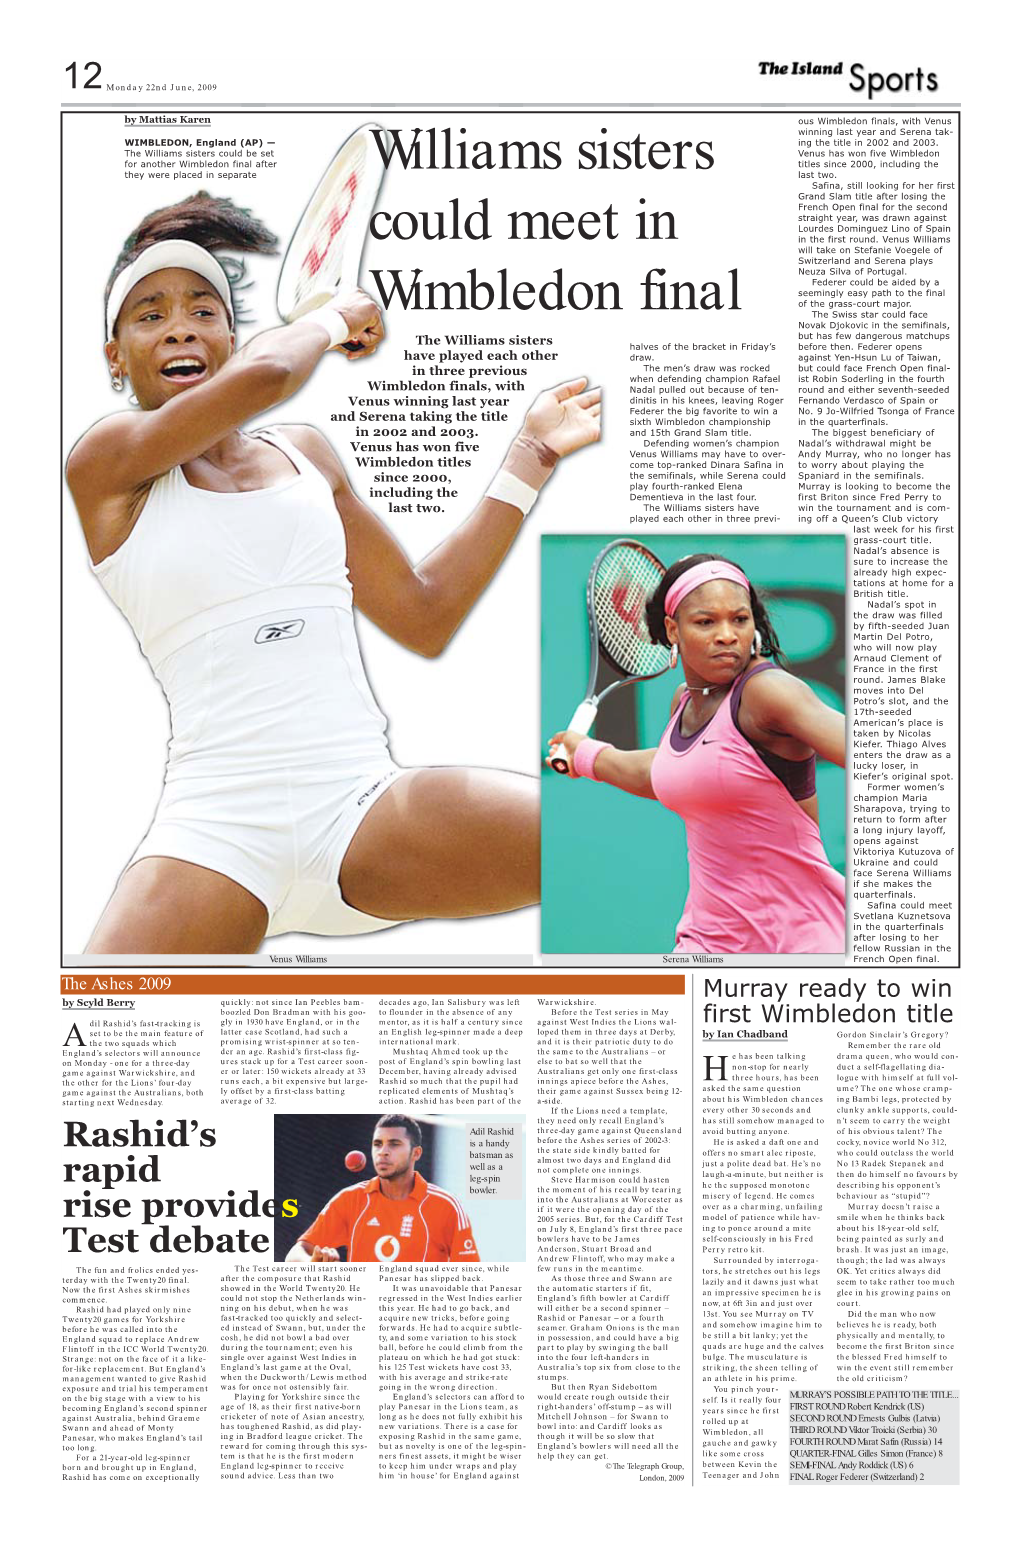 Williams Sisters Could Meet in Wimbledon Final